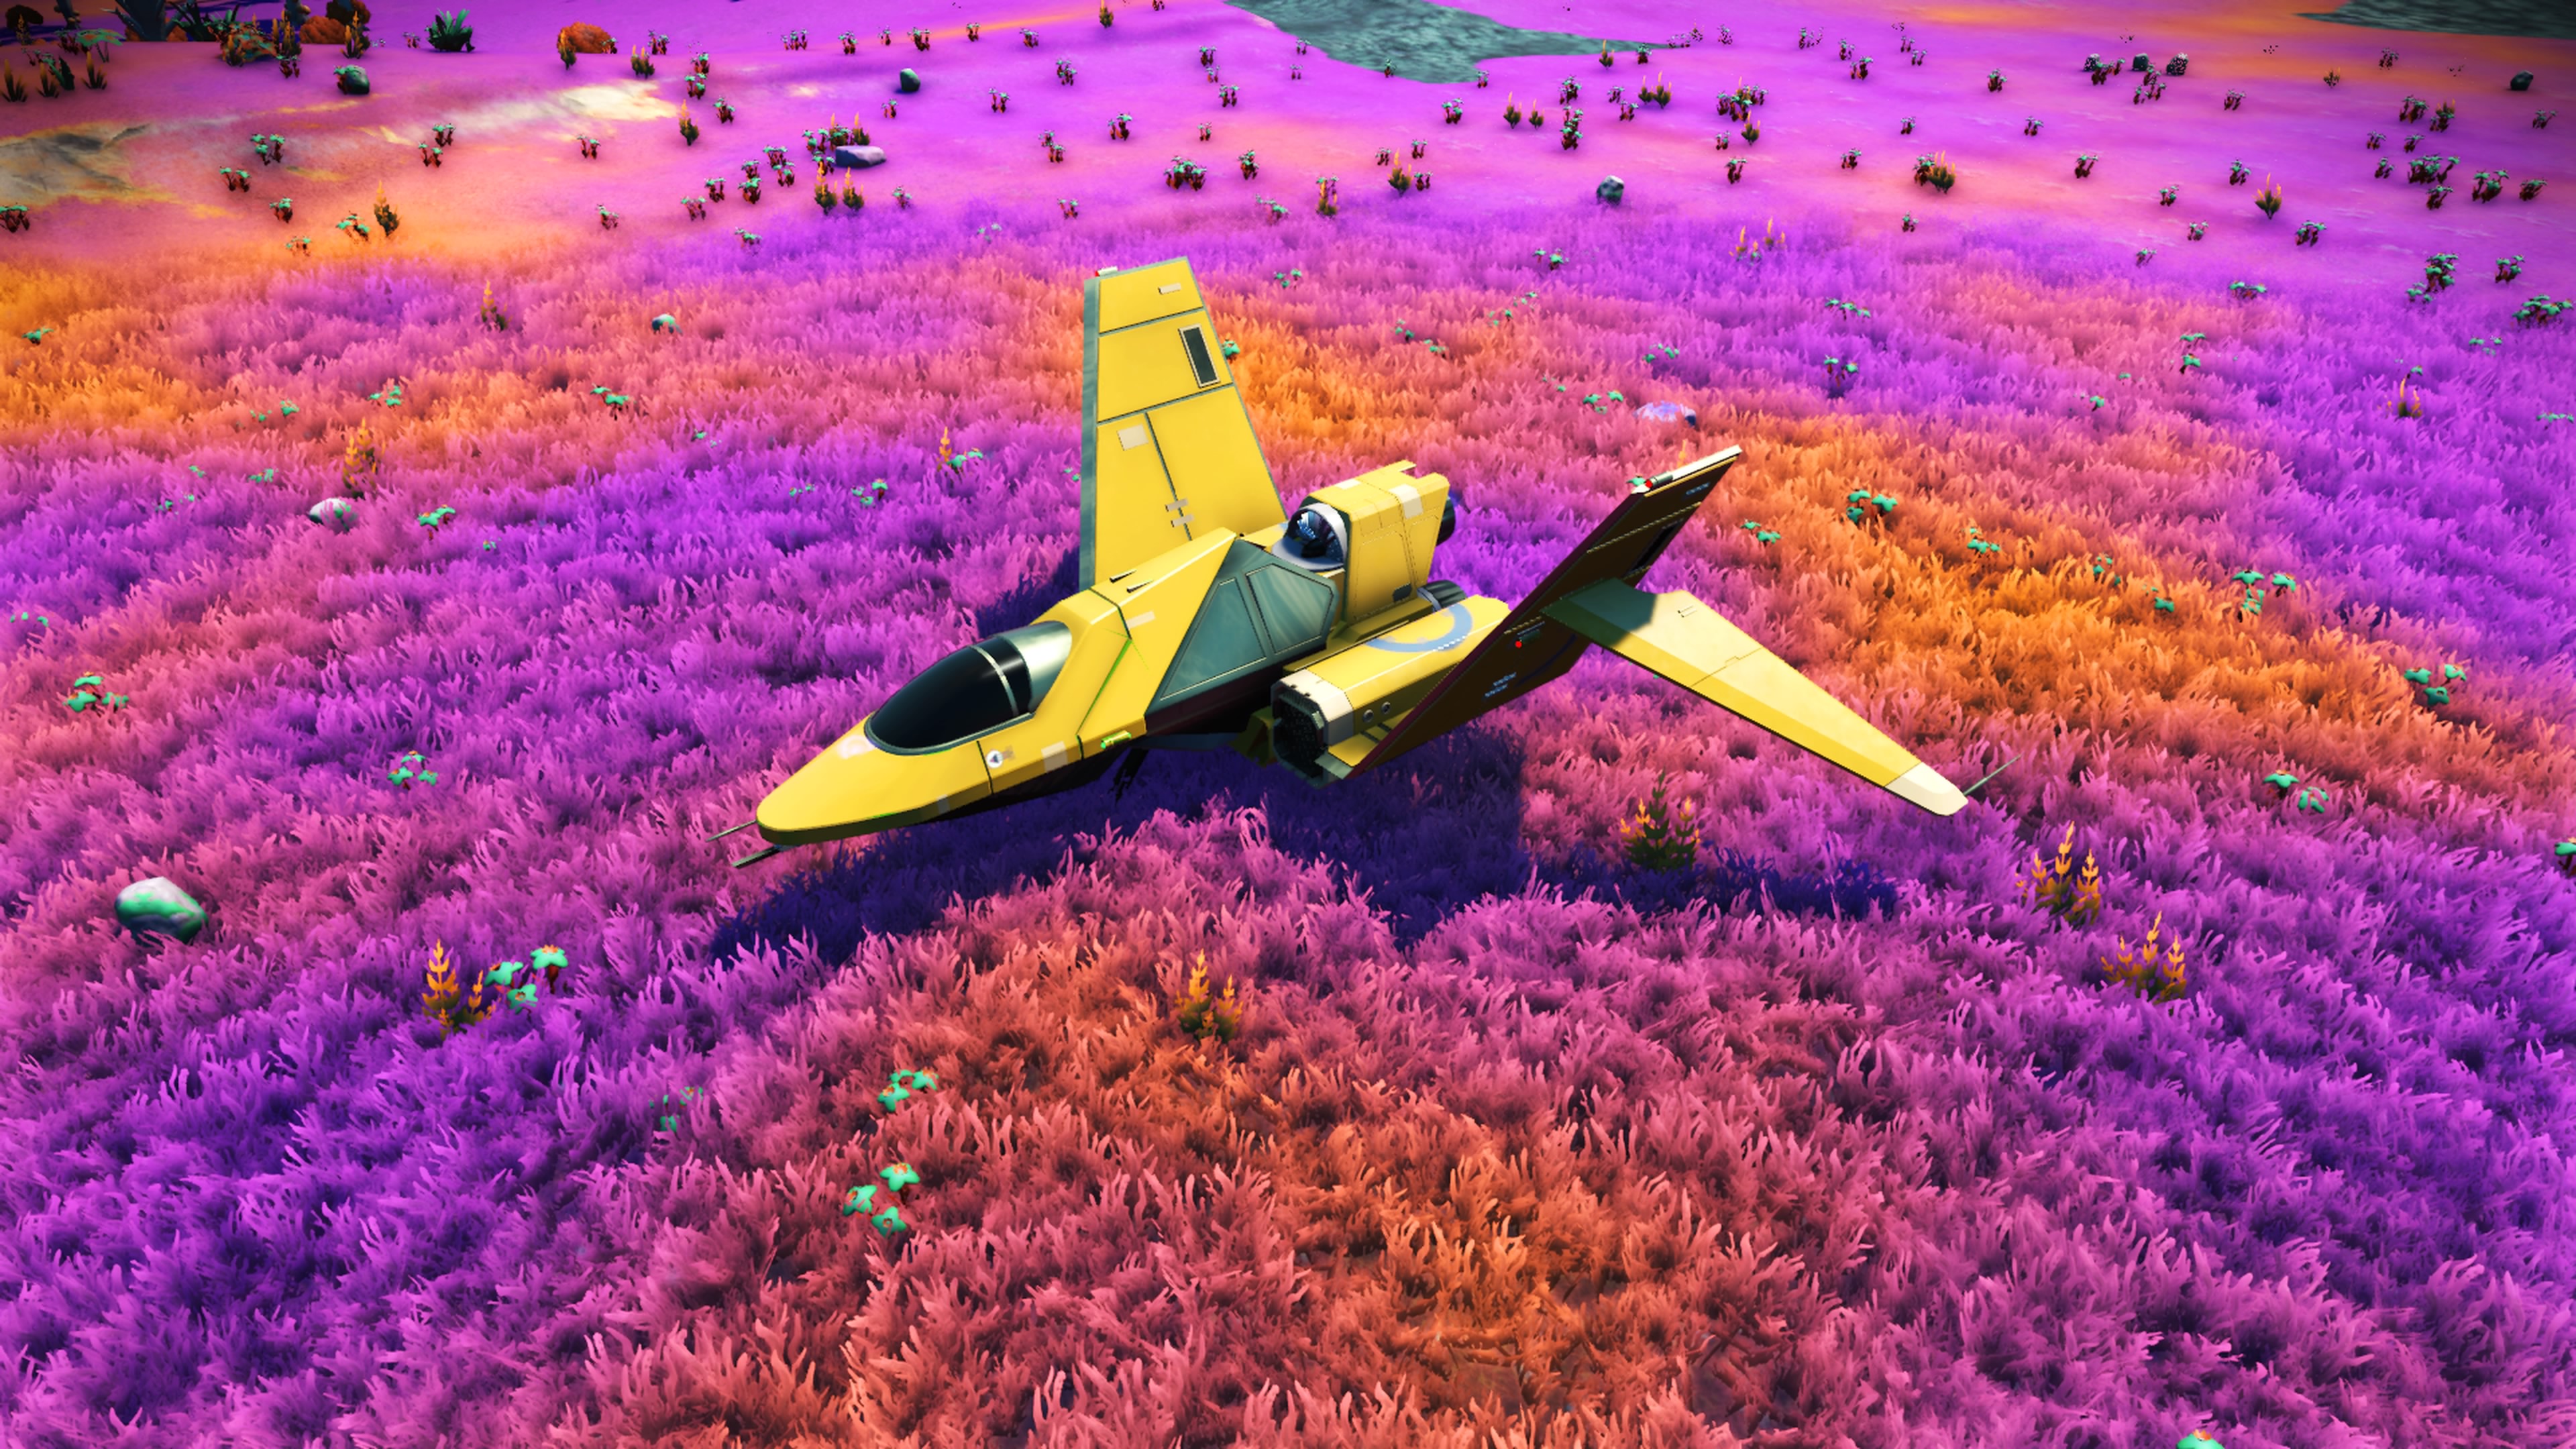 no-mans-sky-game-plane-colorful-fields-wallpaper-hd-games-4k